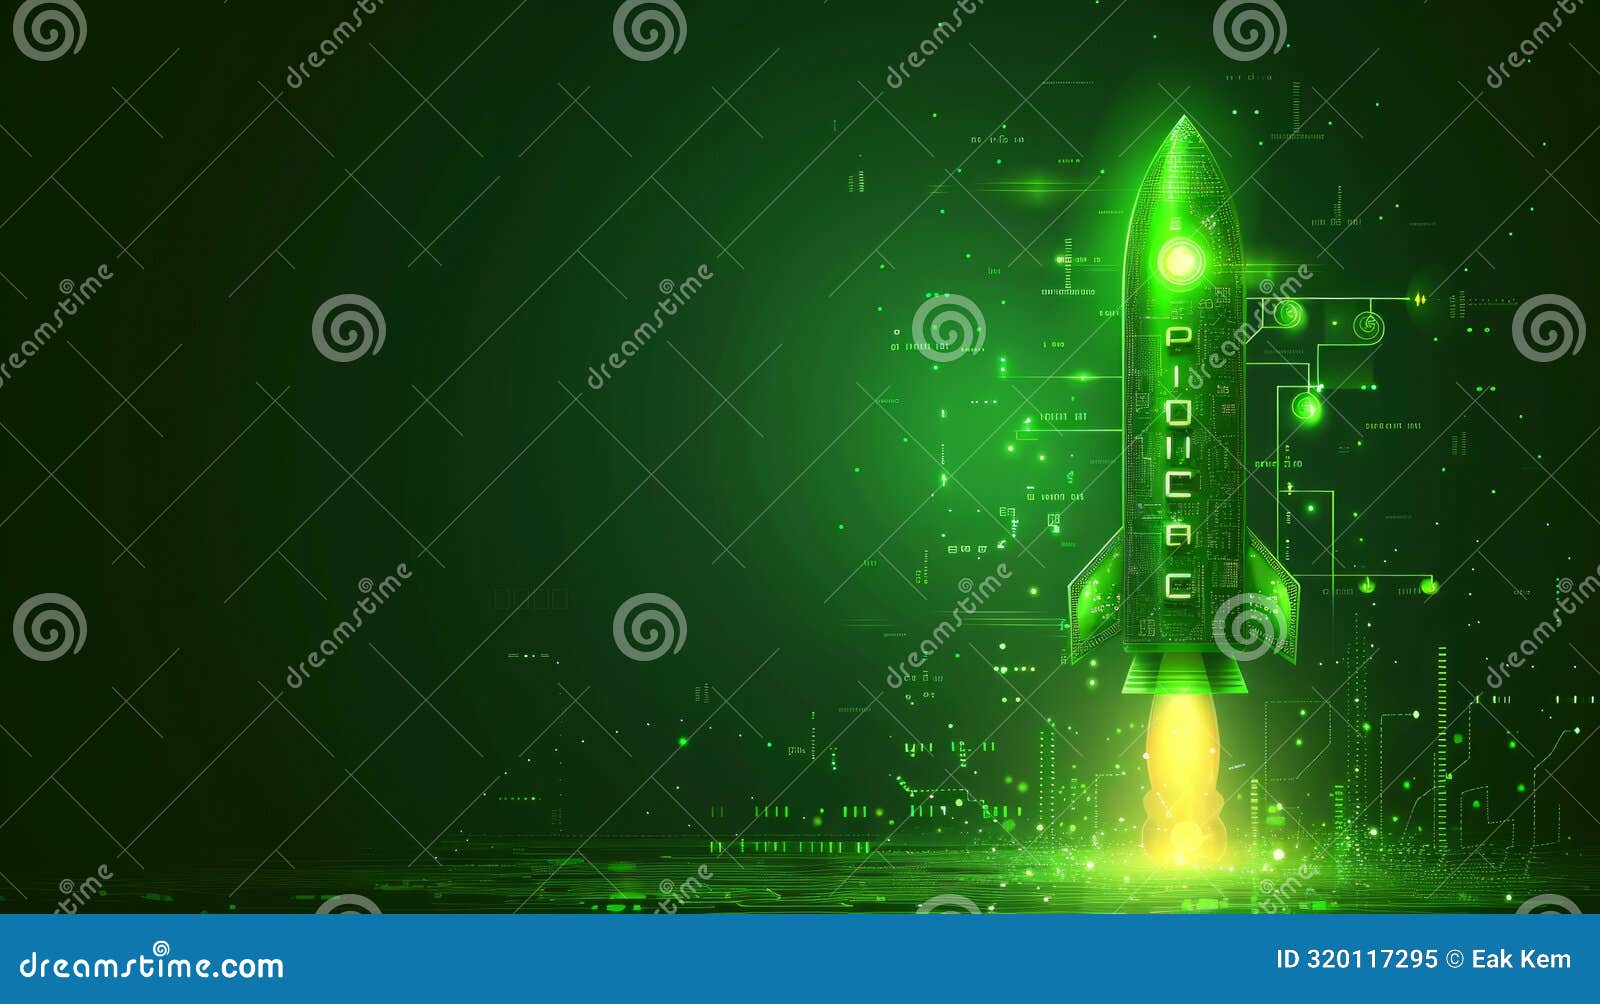 futuristic green rocket launching into digital space with matrix inspired background, glowing effects, and technological